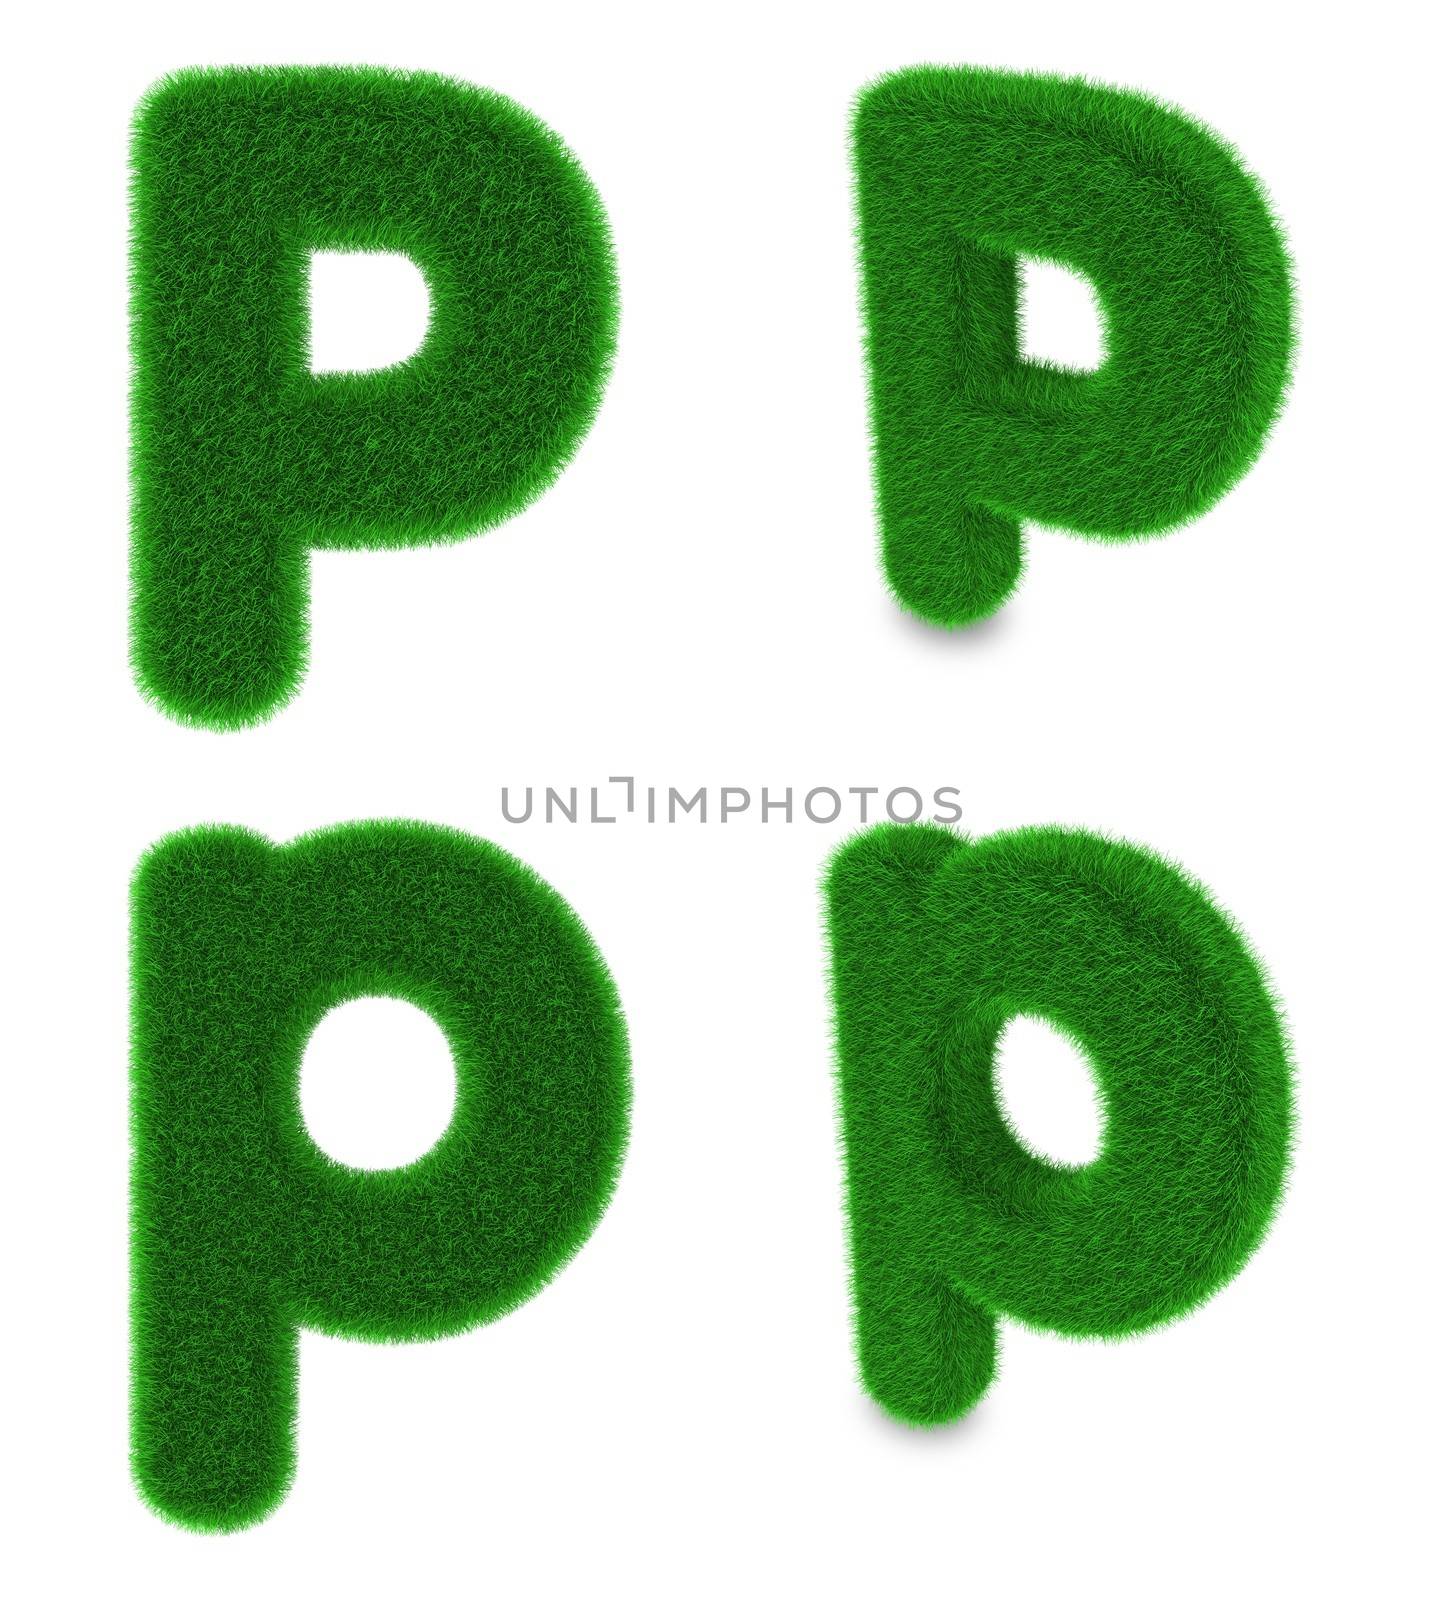 Letter P made of grass by Harvepino